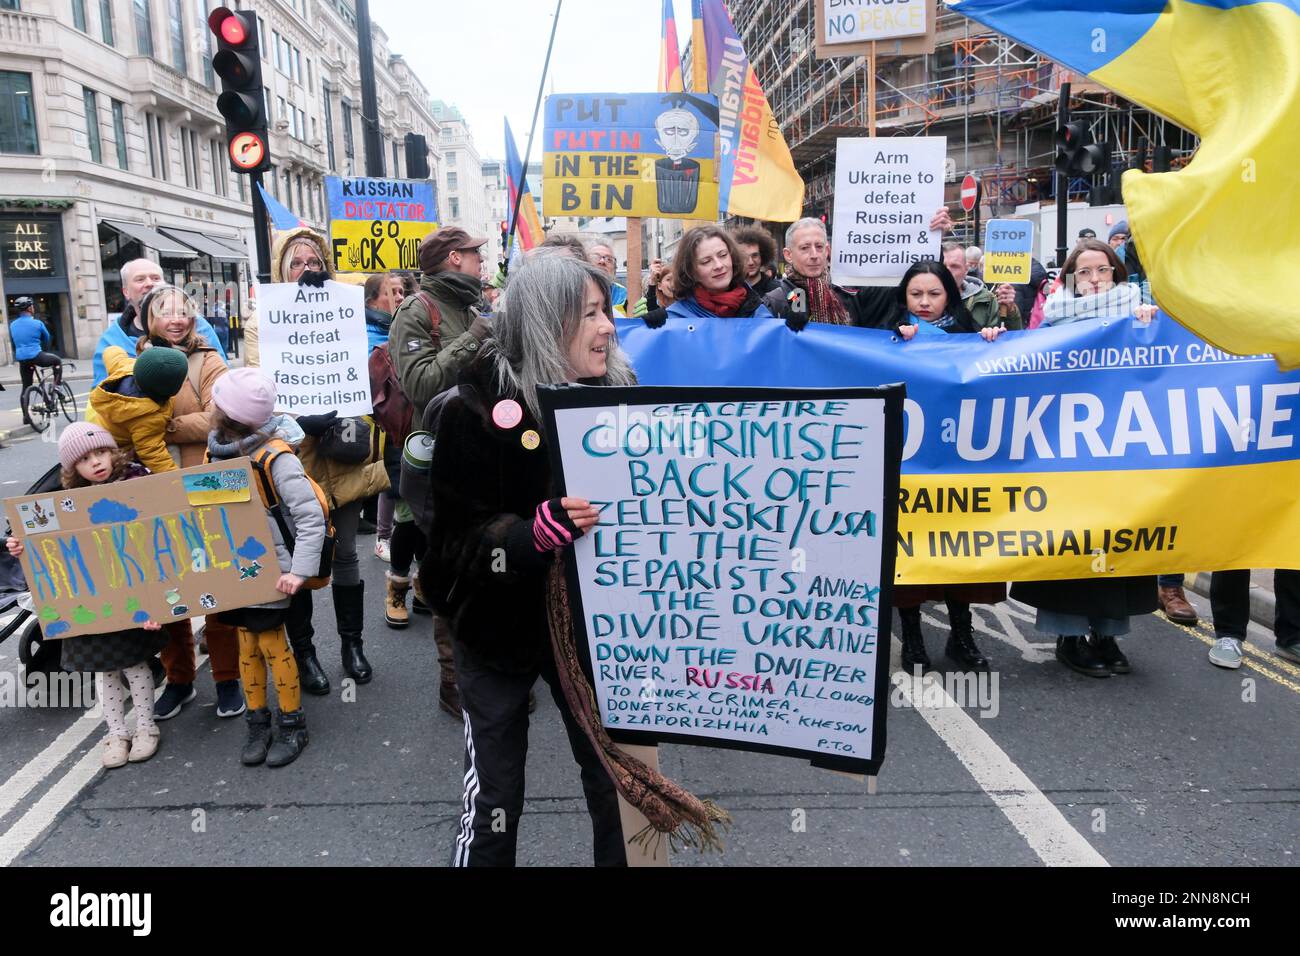 Great Portland Street, London, UK. 25th Feb 2023. A counter protest in support of Ukraine at the Stop the War coalition protest in London against the war in Ukraine, with arguments and opposing banners on view. Credit: Matthew Chattle/Alamy Live News Stock Photo